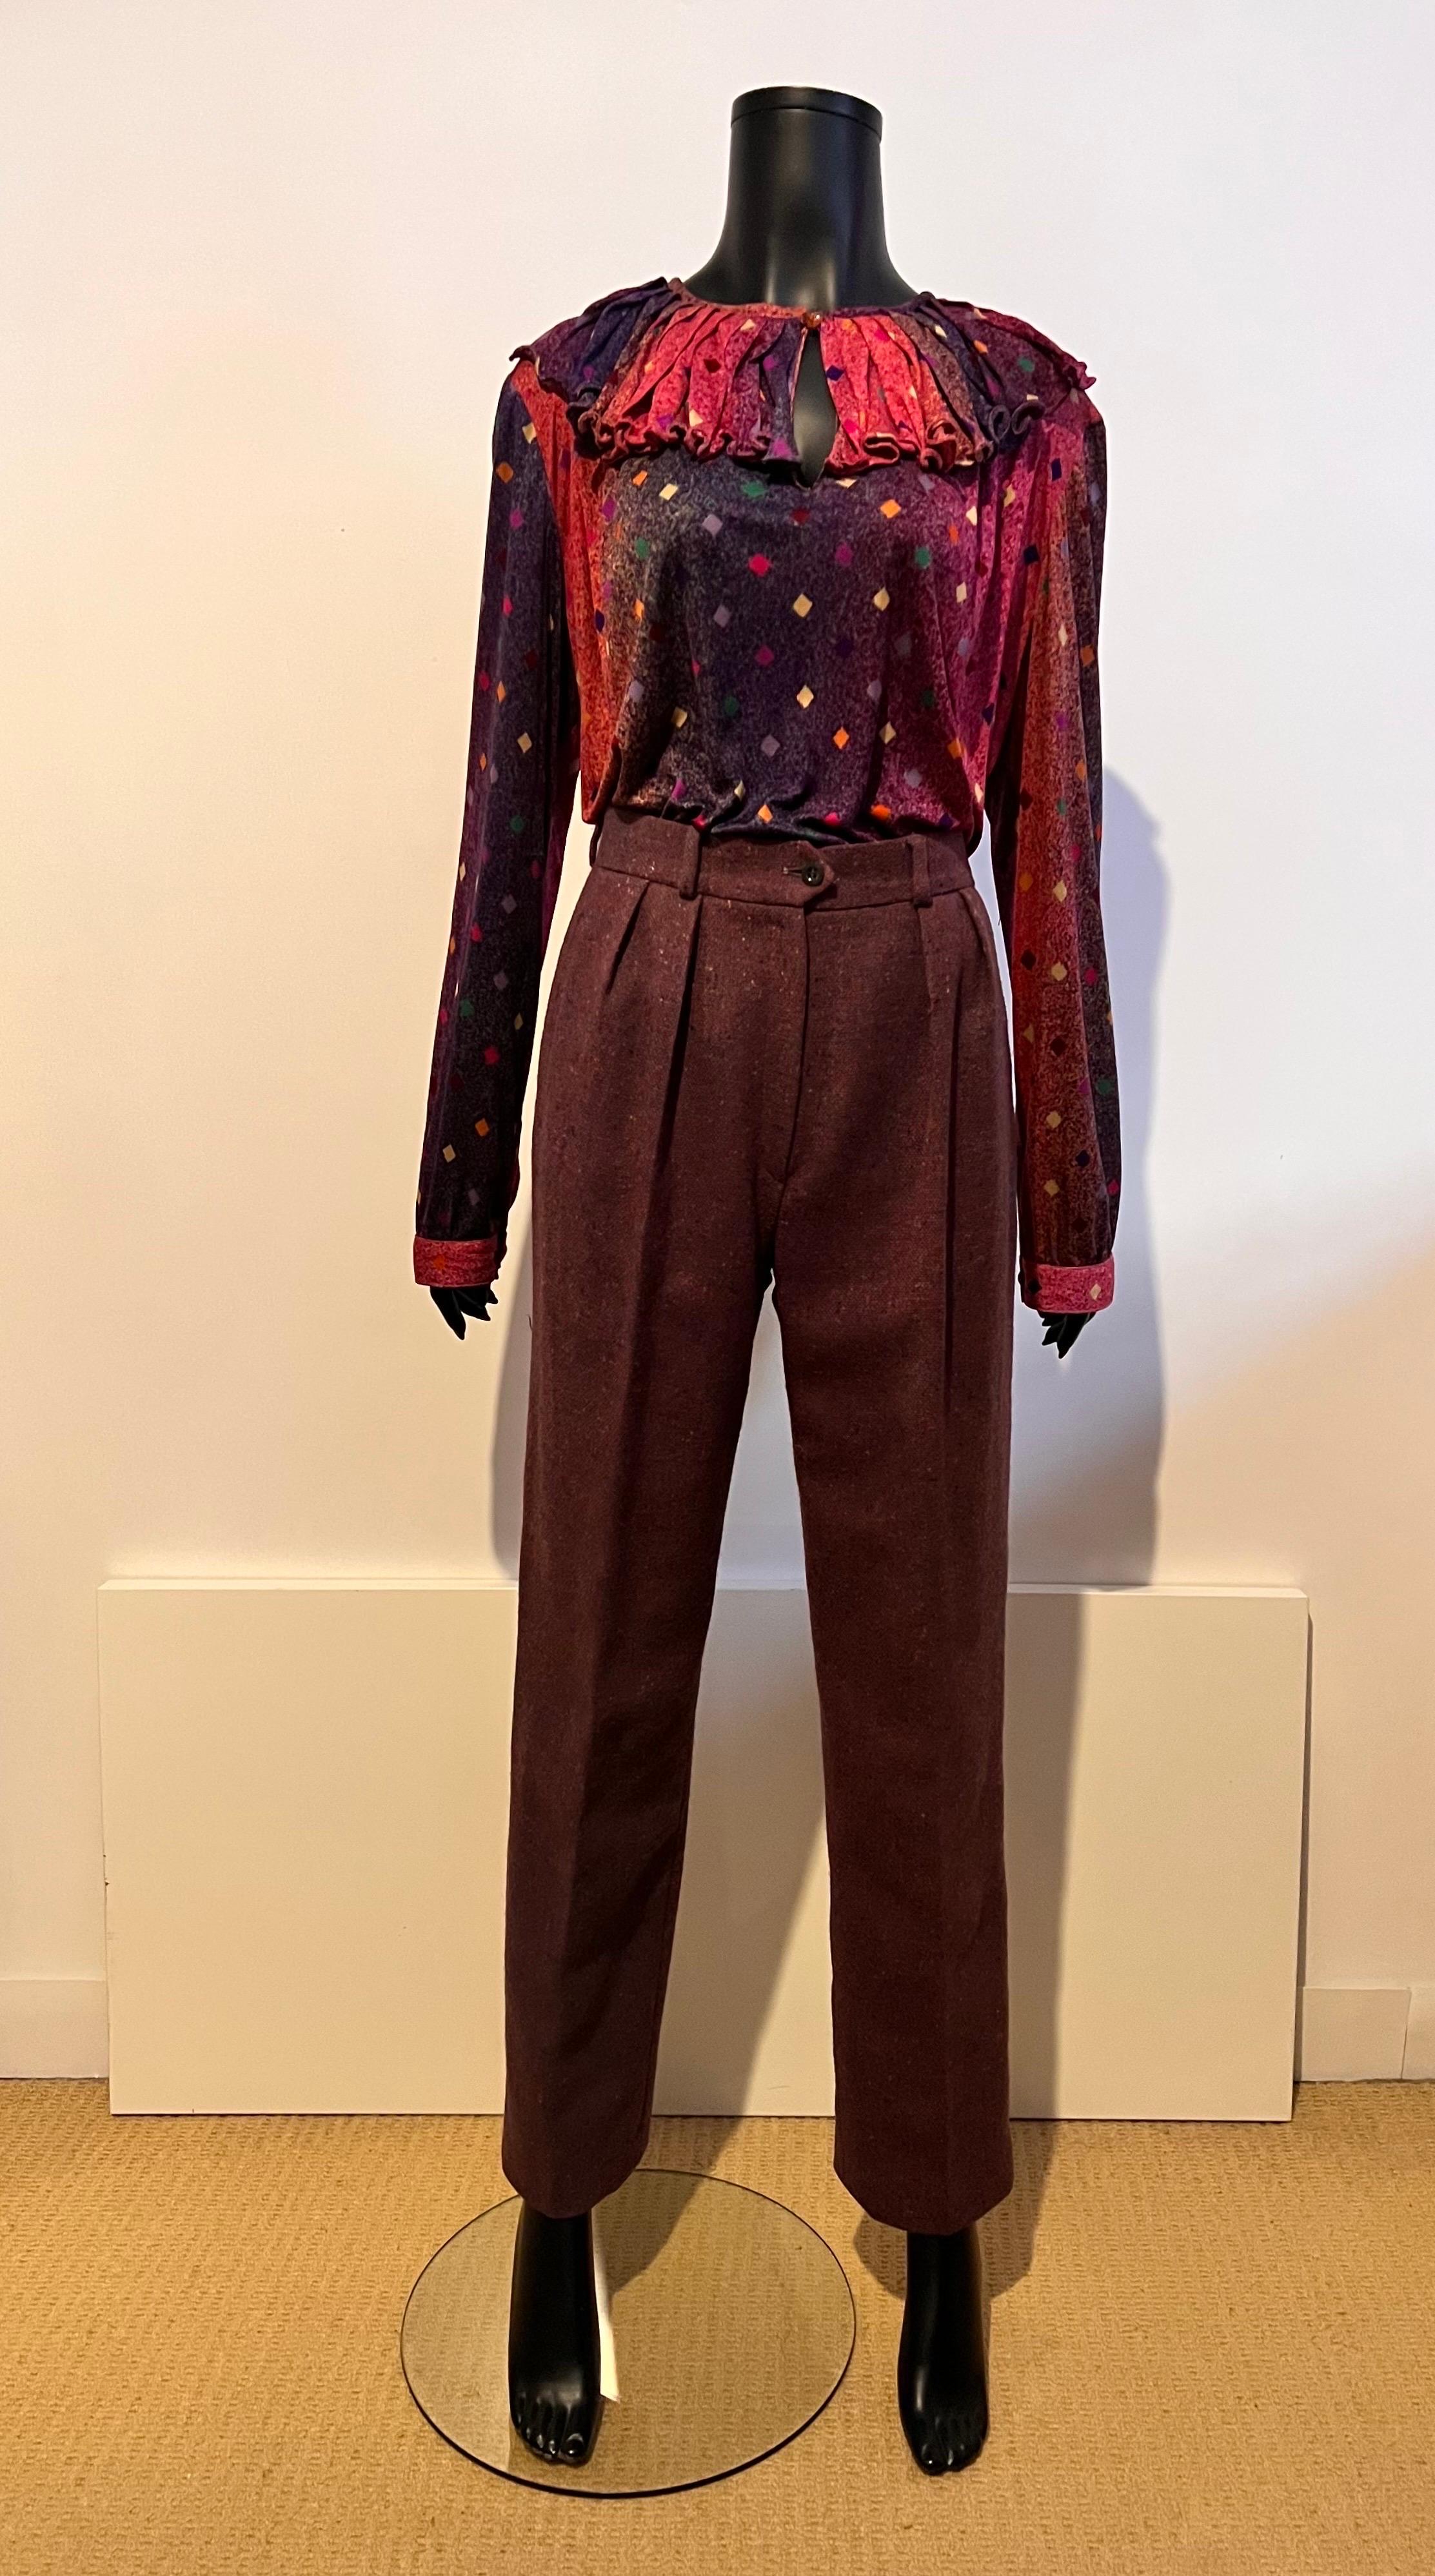 A beautiful example of the early 1980's Missoni design in these 100% Italian wool tweed, pleat front pants in a stunning colour combination showing an overall muted purple colour with flecks of orange, blue and lilac.

Beautiful welted pockets on